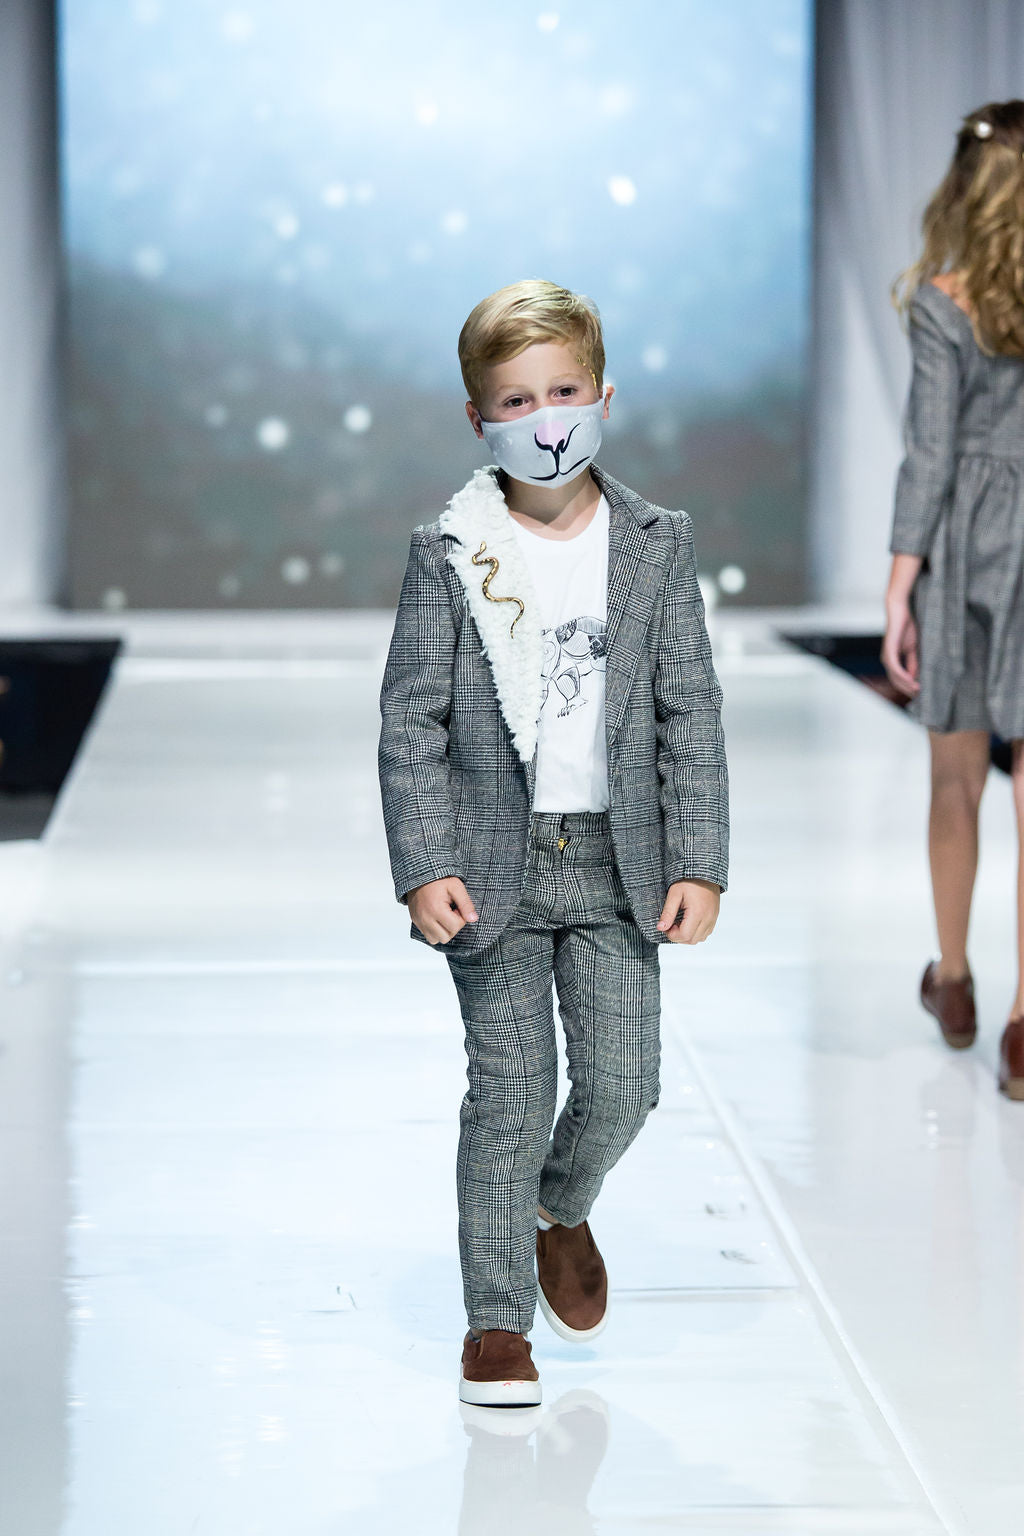 Young lad struts the runway in his Asriel Blazer, Scholars pants, and lorek shirt with matching mask